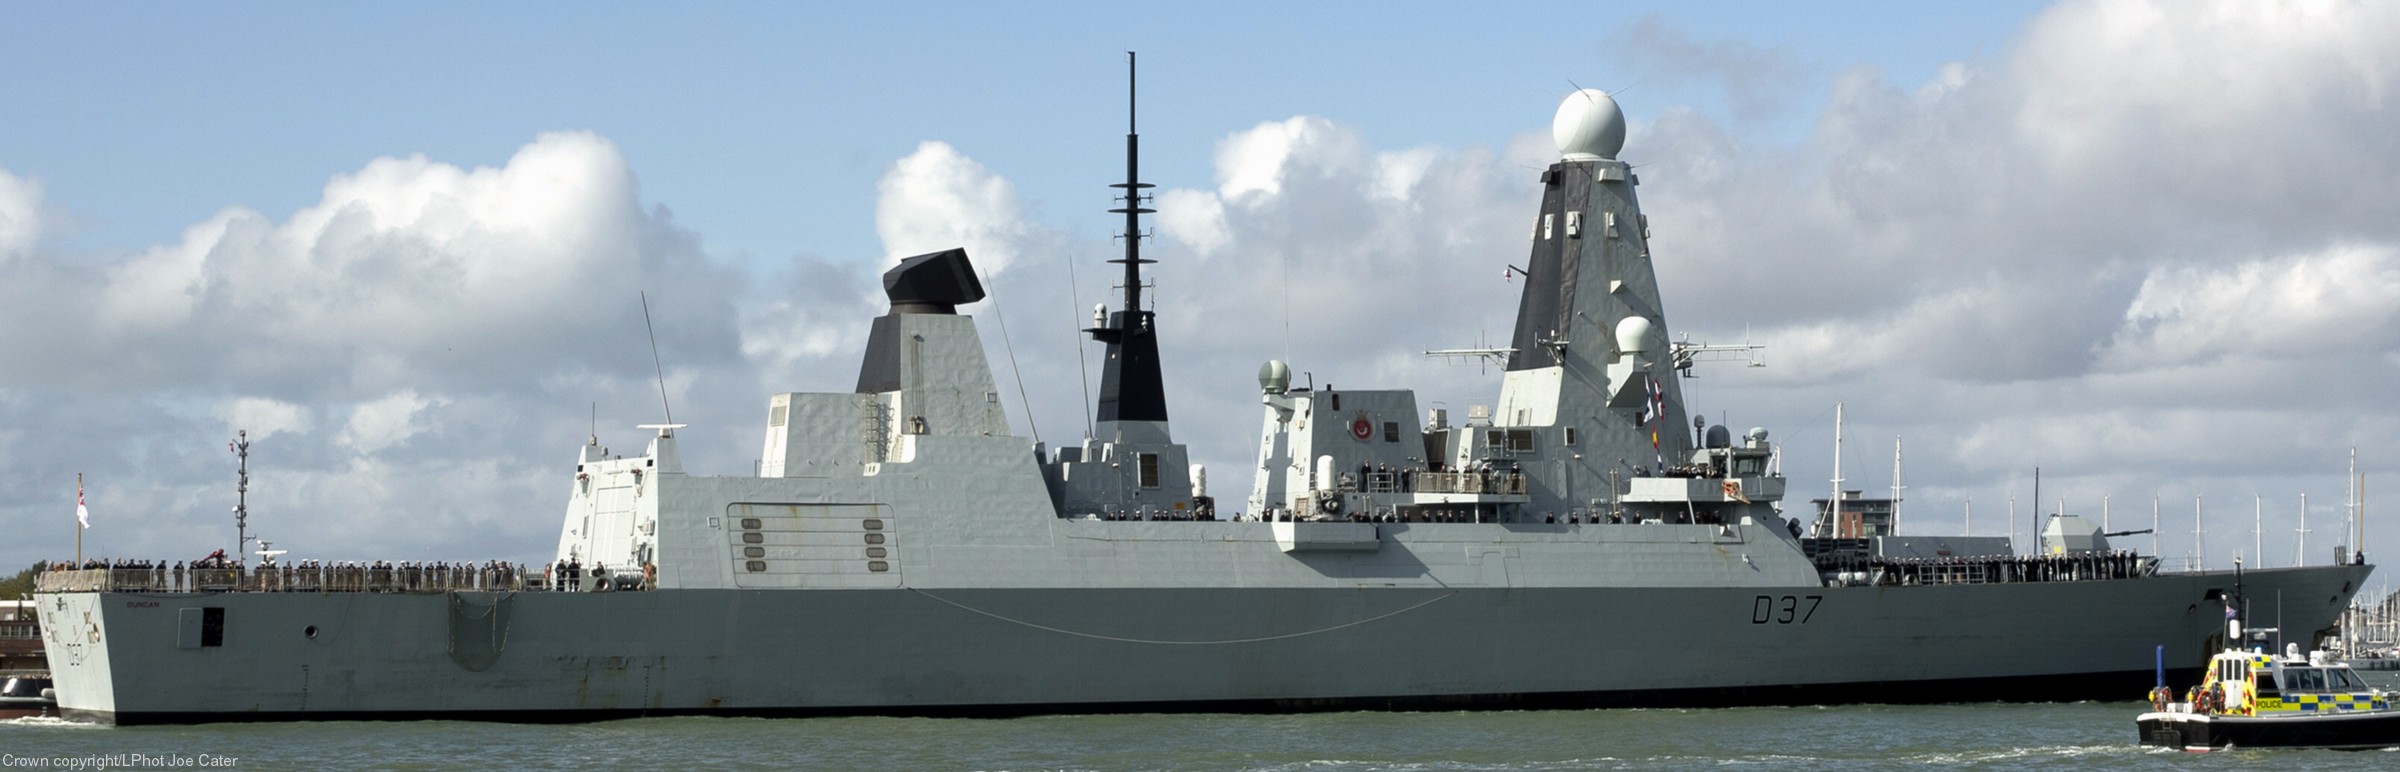 d37 hms duncan d-37 type 45 daring class guided missile destroyer ddg royal navy sea viper 50